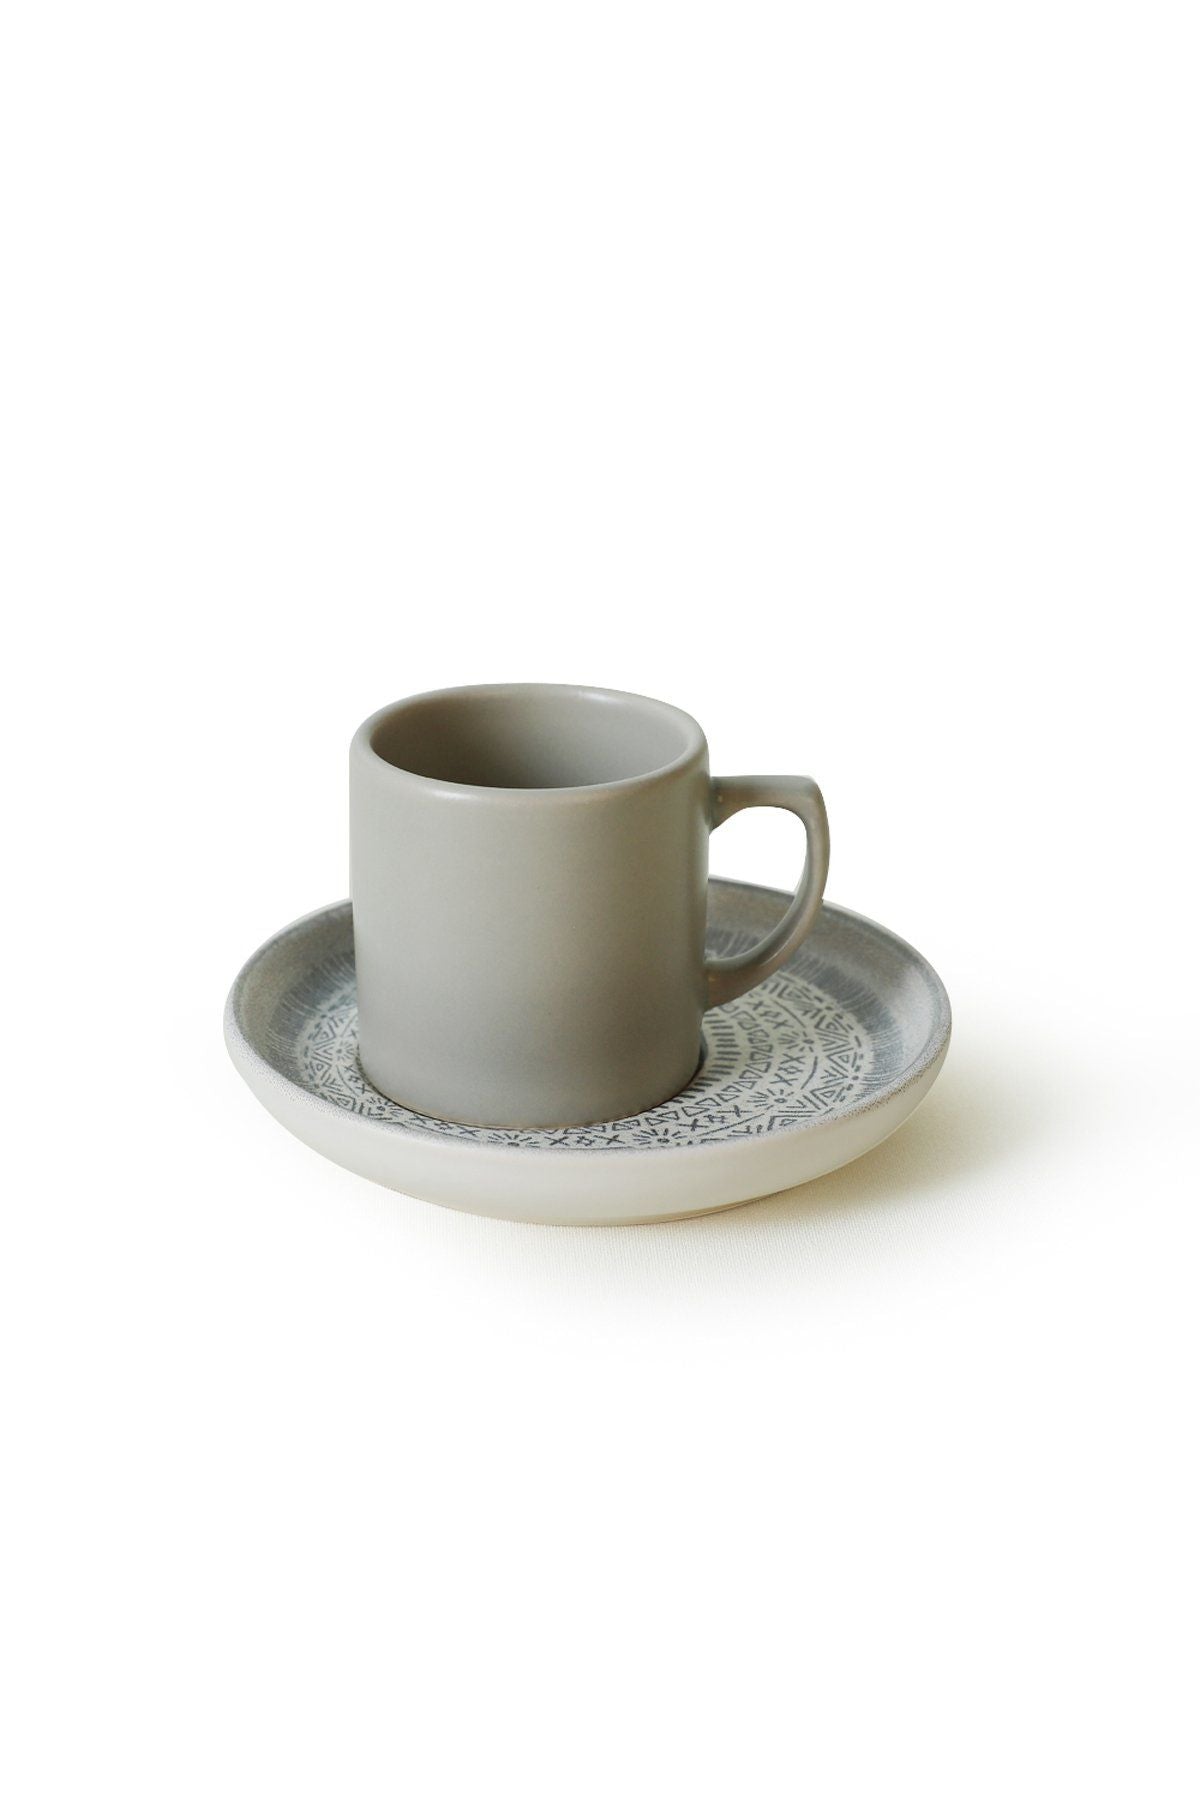 X0001532800 - Coffee Cup Set (12 Pieces)